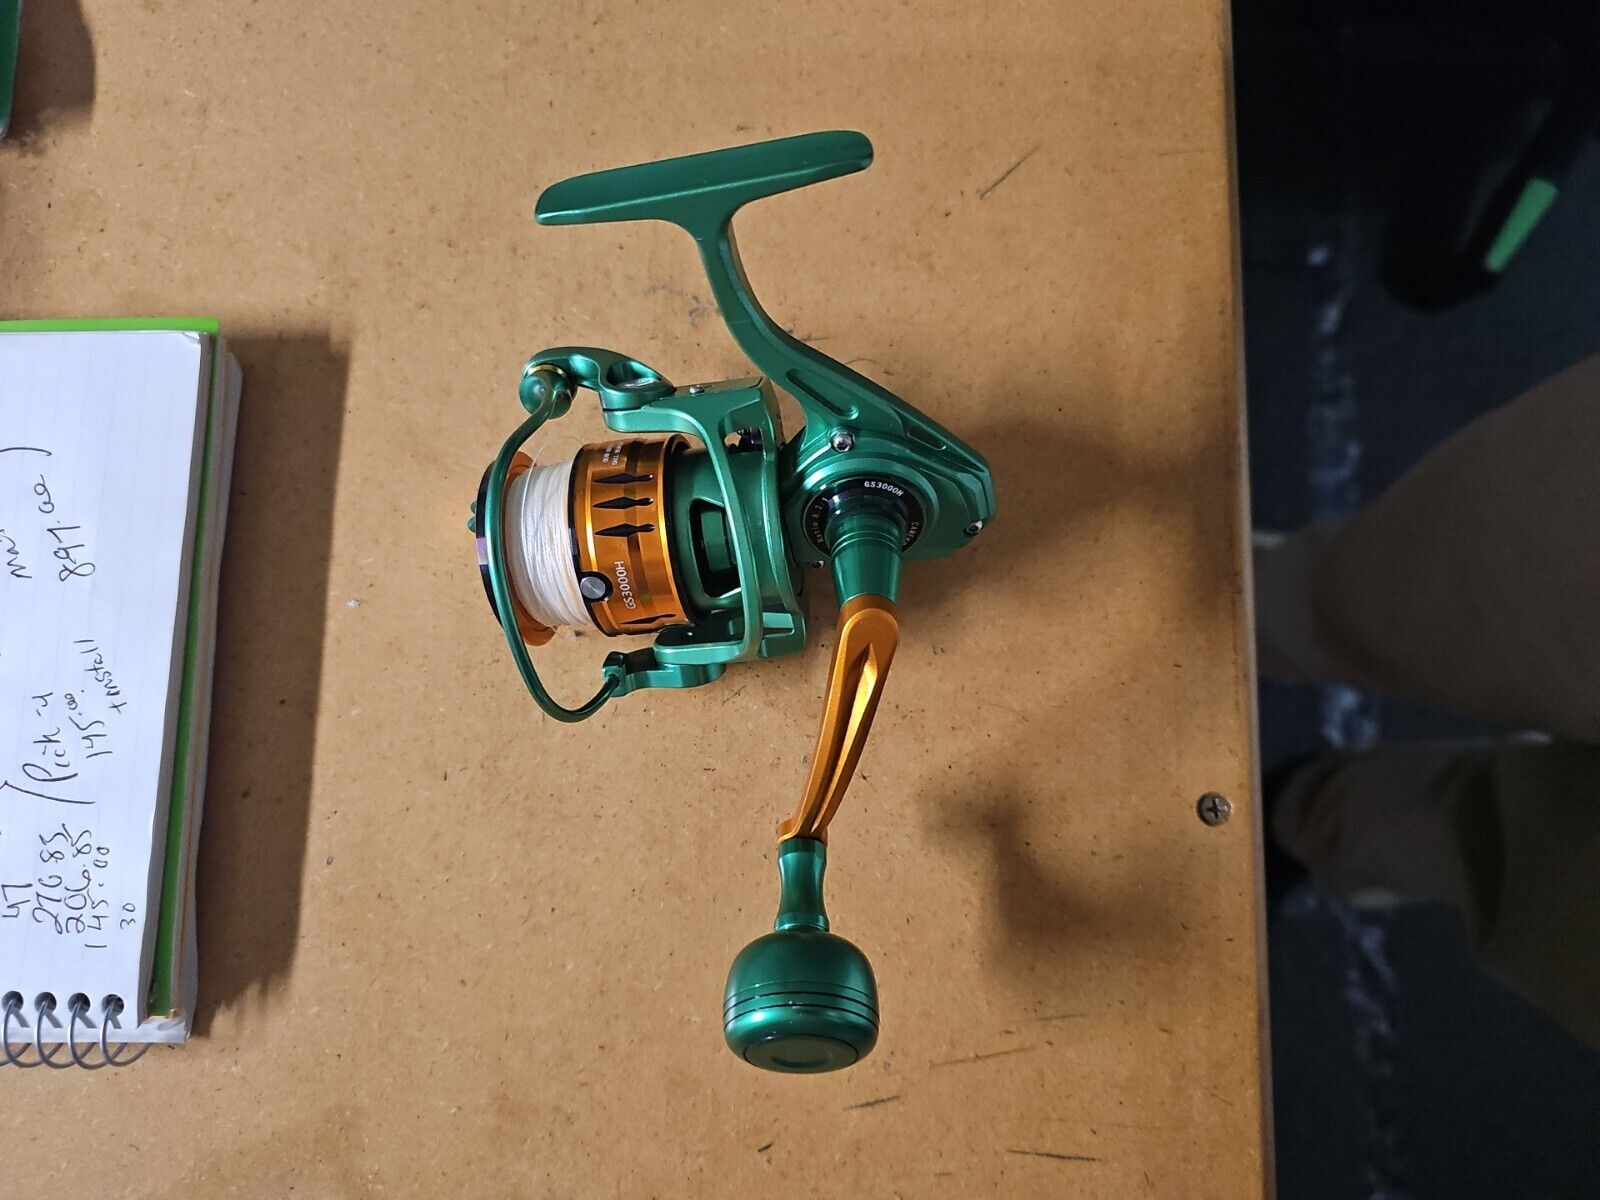 CAMEKOON Saltwater Spinning Used Once Fishing Reel Aluminum Body Rotor 33LB  Drag